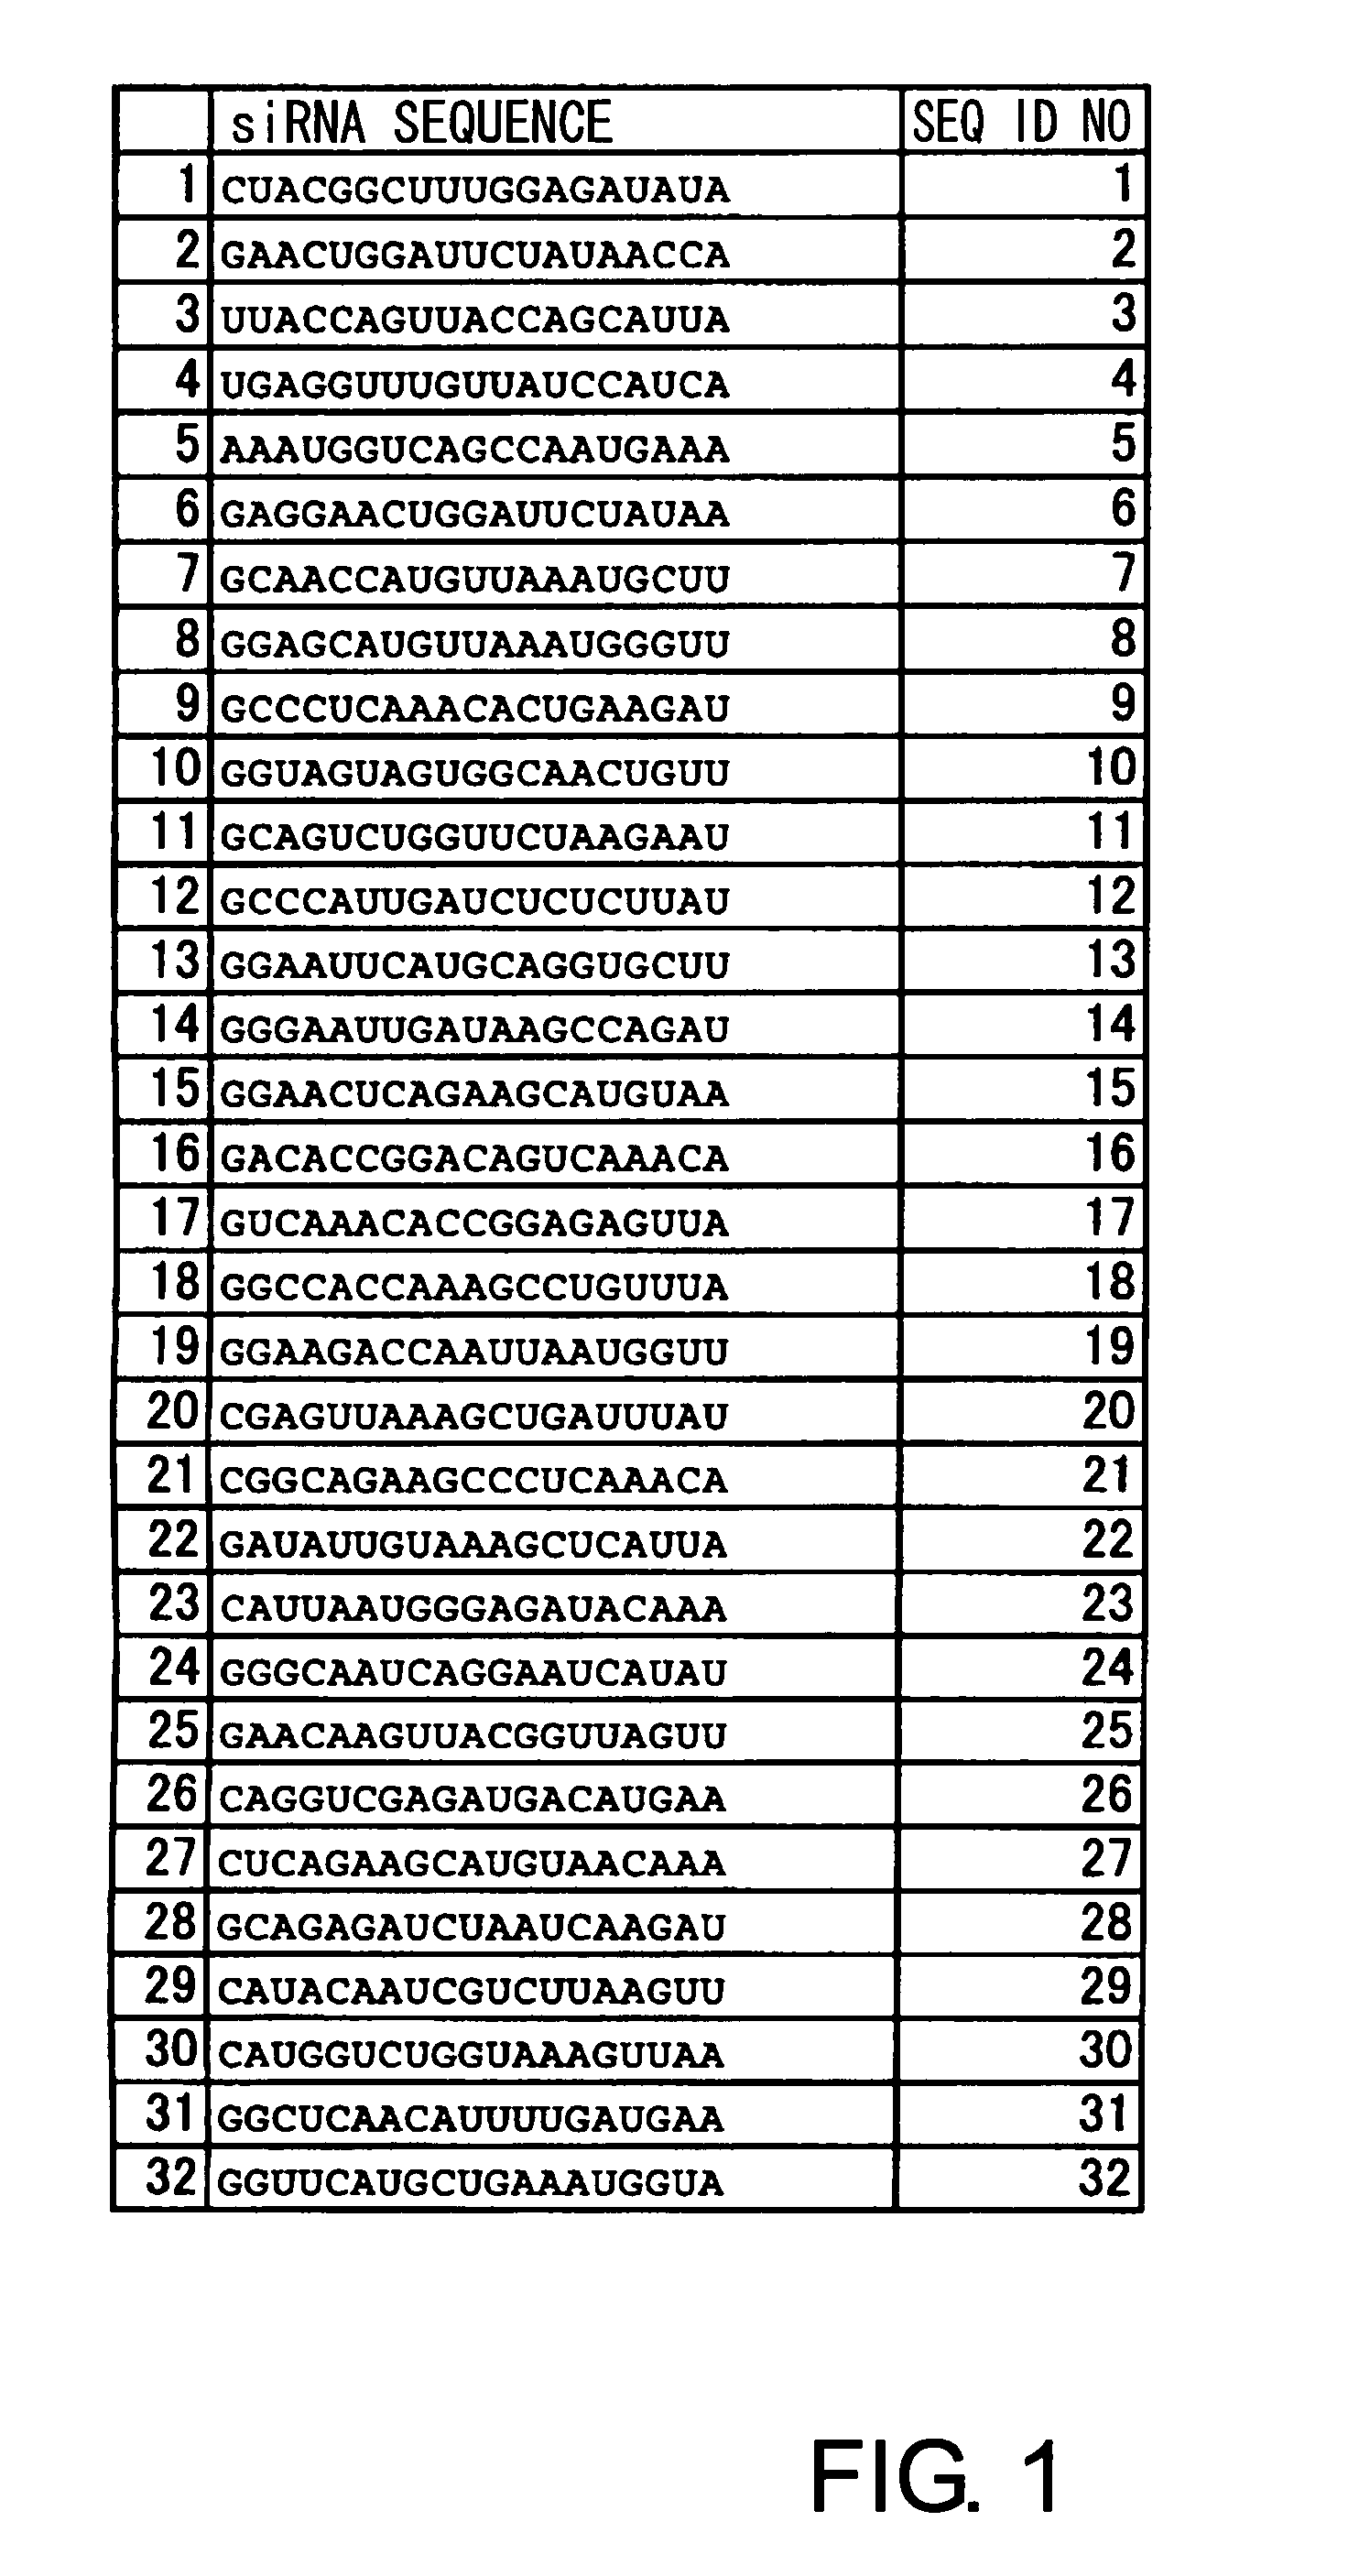 Cancer-cell-specific cell proliferation inhibitors